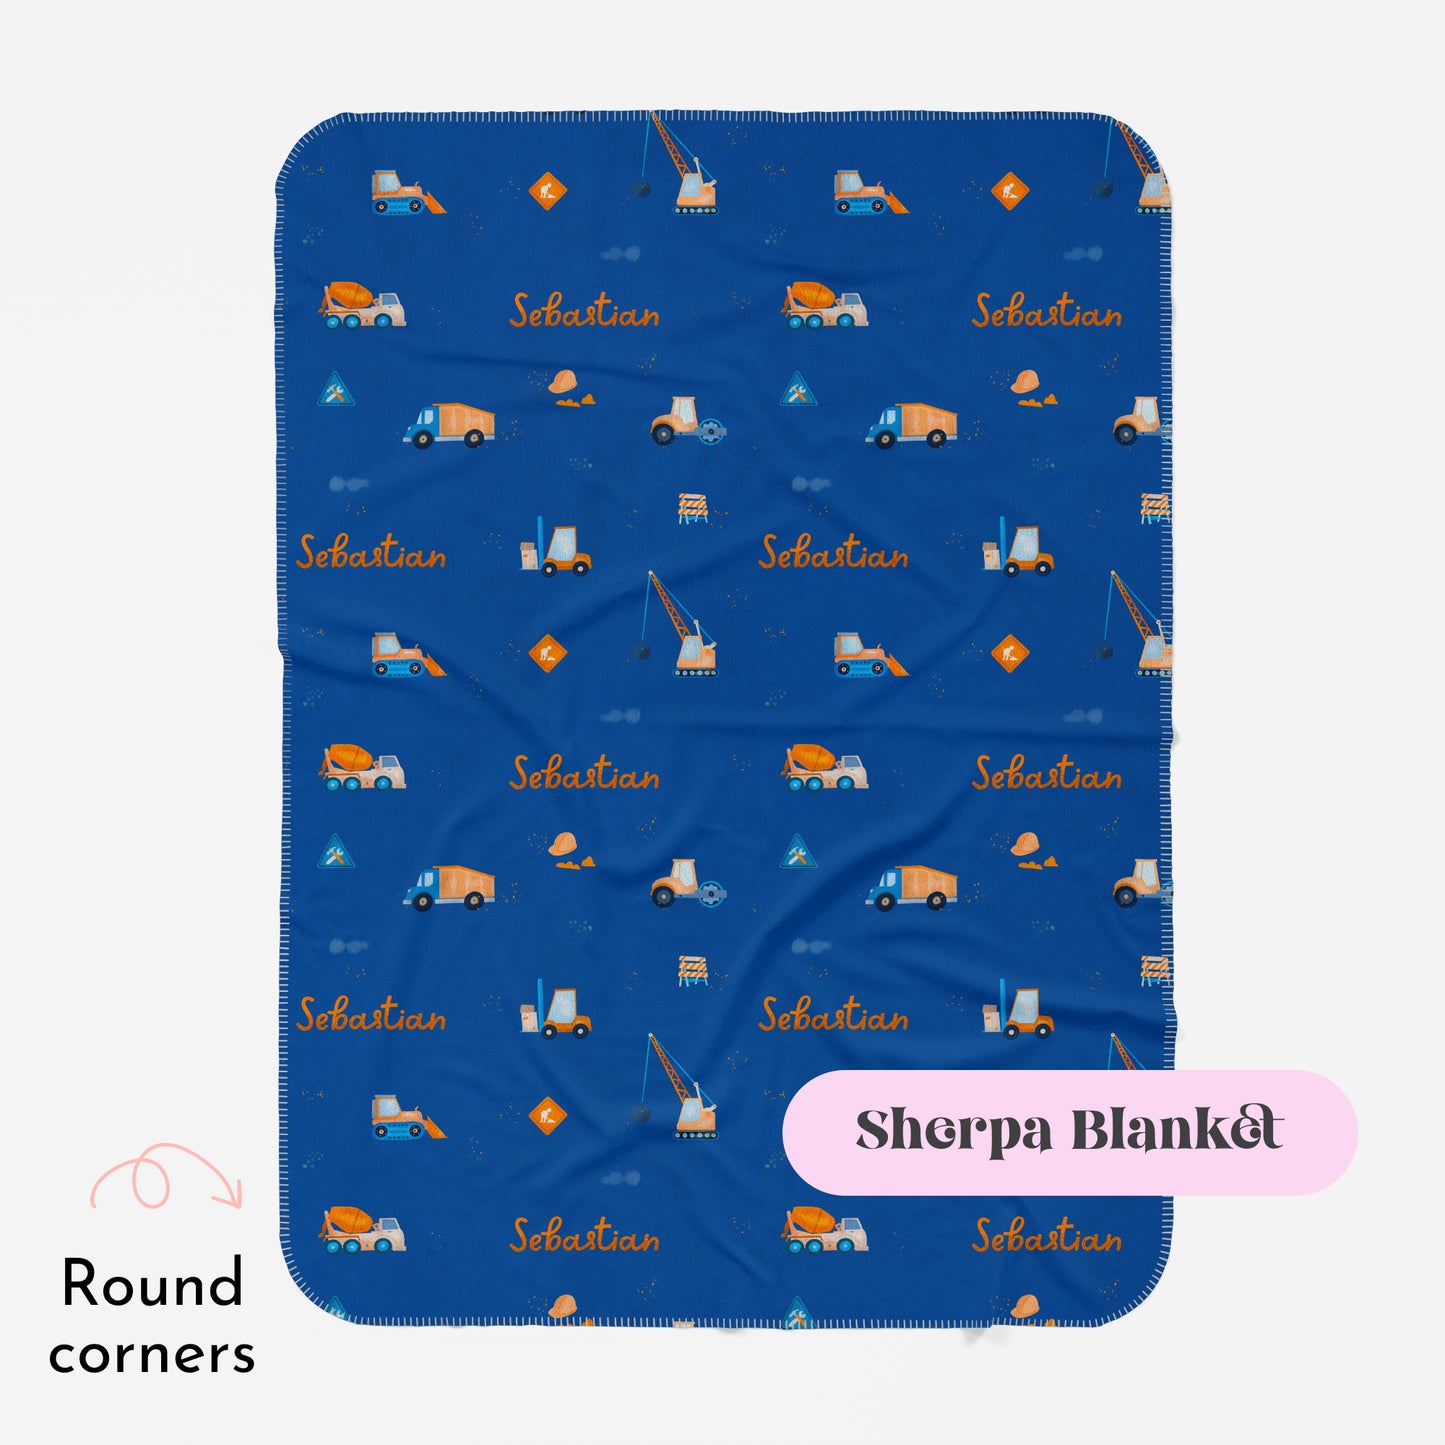 Construction Personalized Blanket